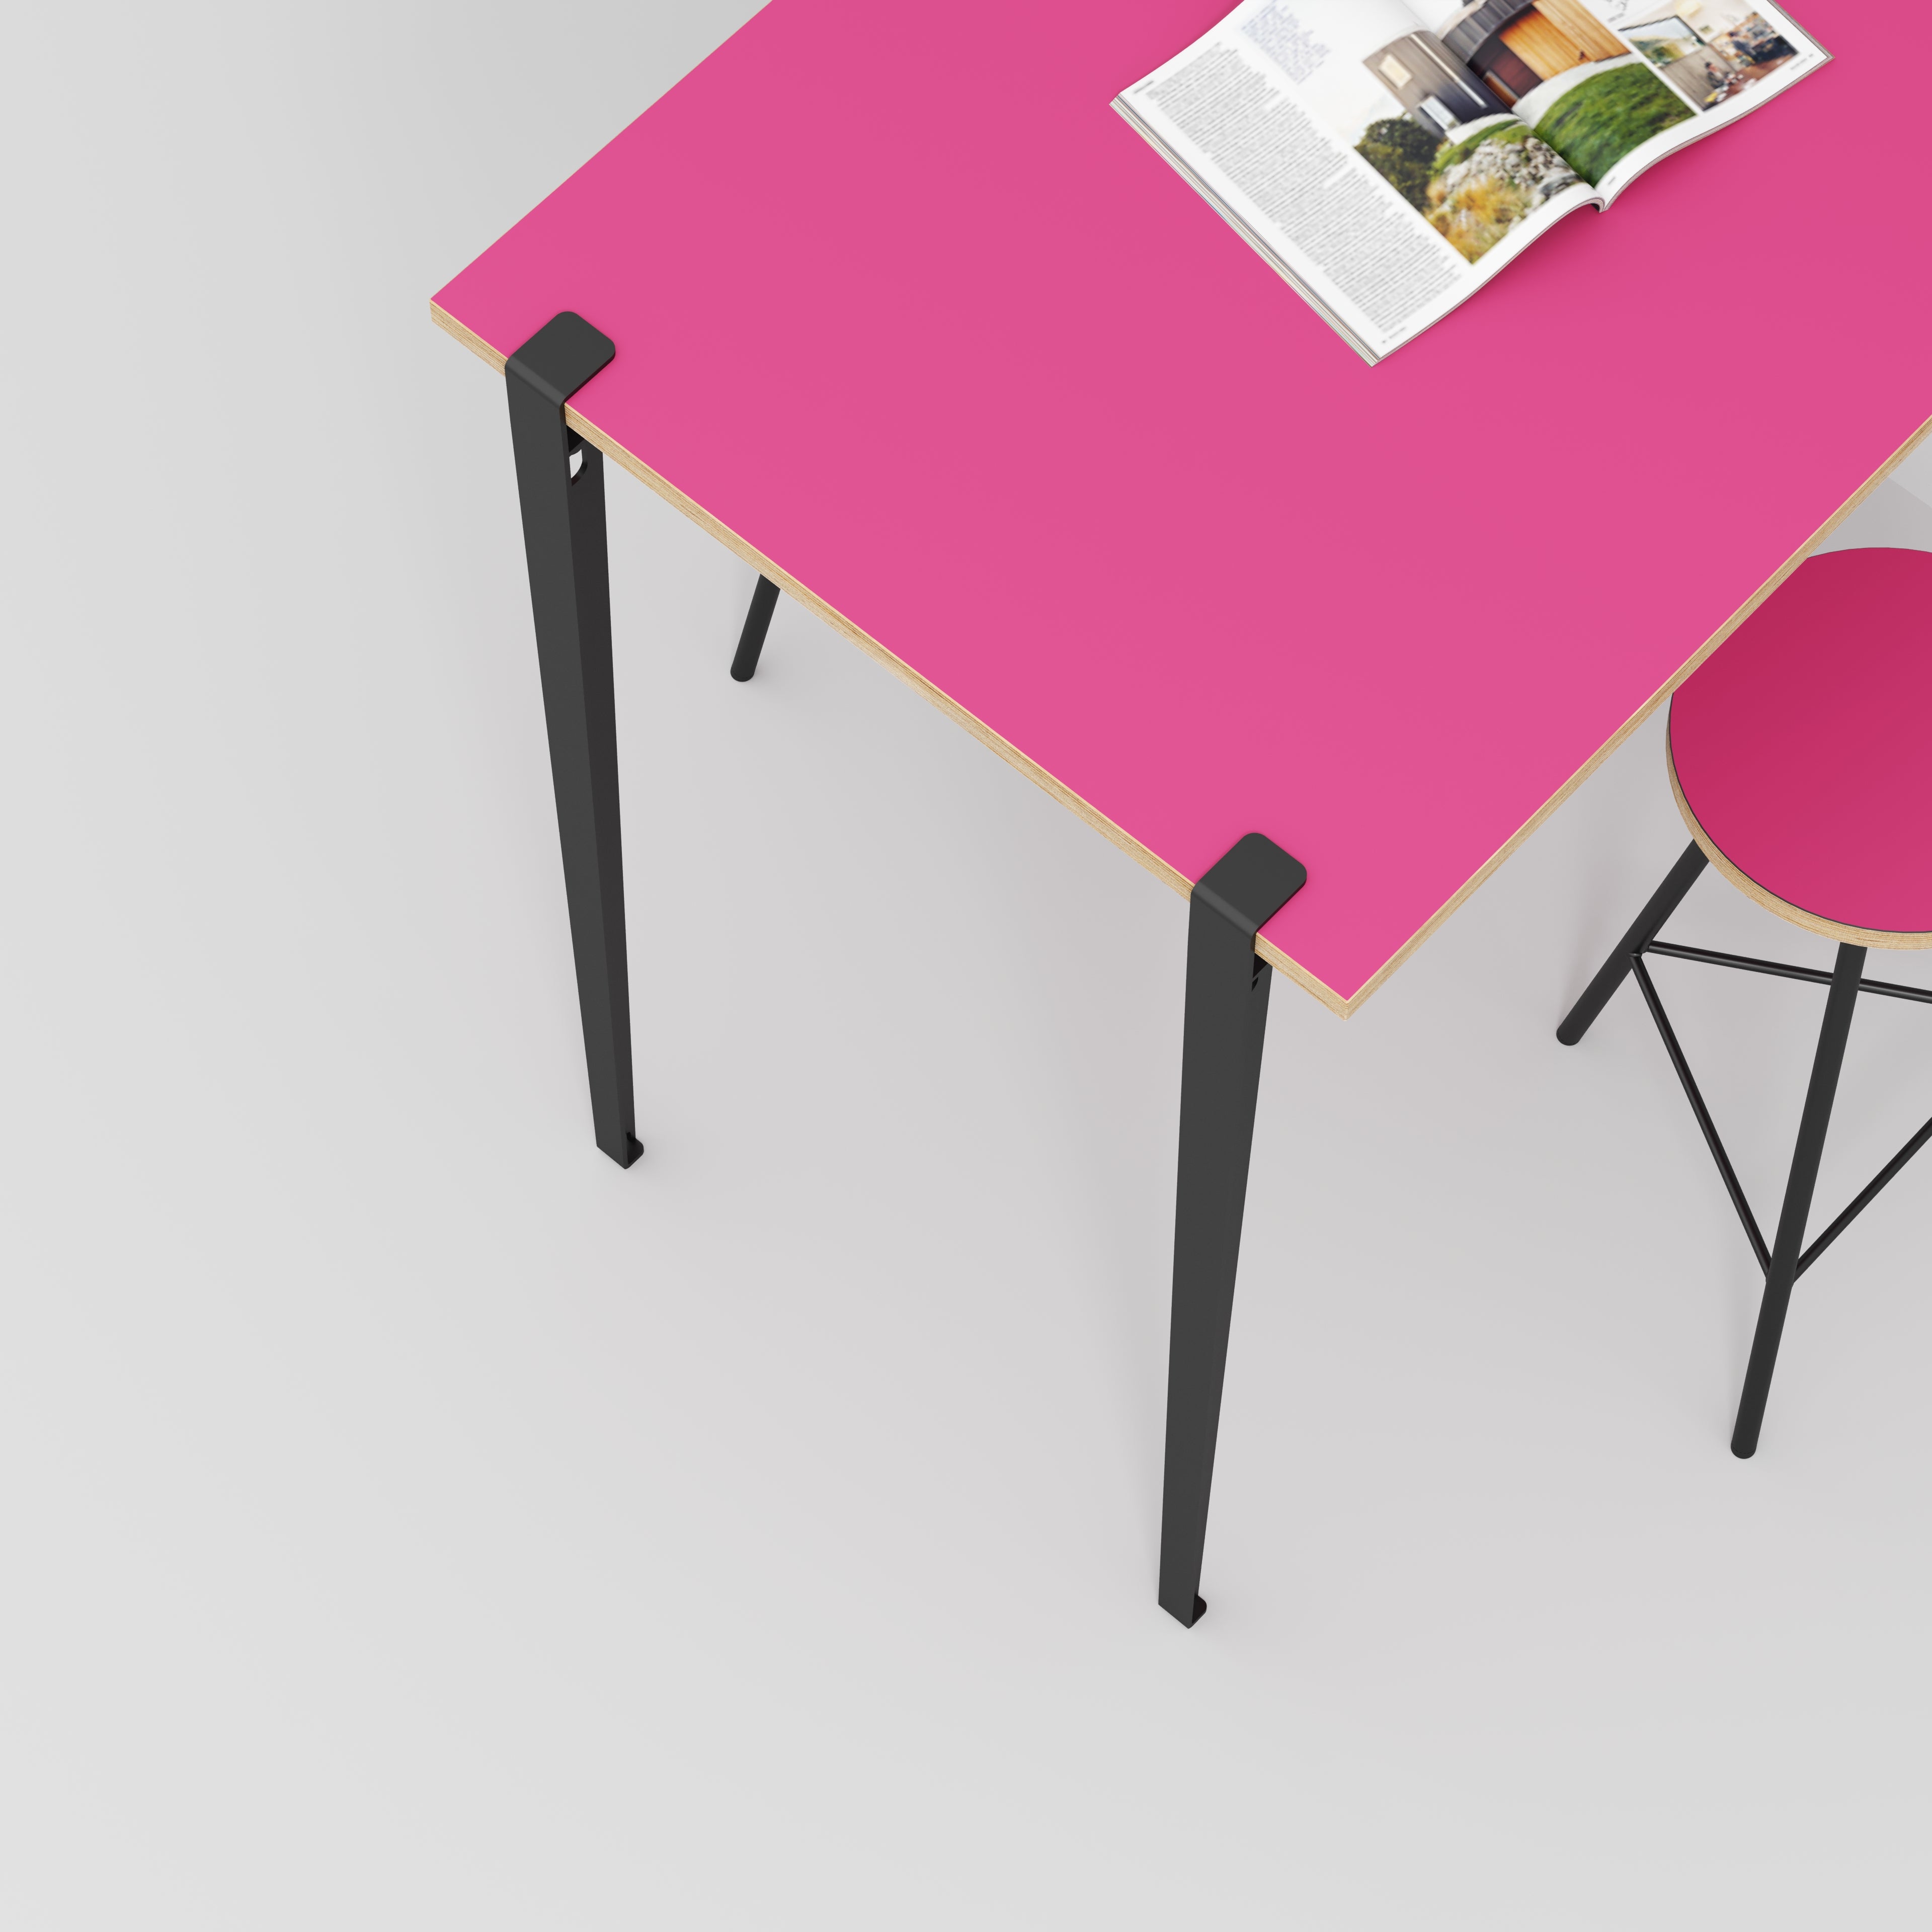 Wall Table with Black Tiptoe Legs and Brackets - Formica Juicy Pink - 1200(w) x 800(d) x 1100(h)